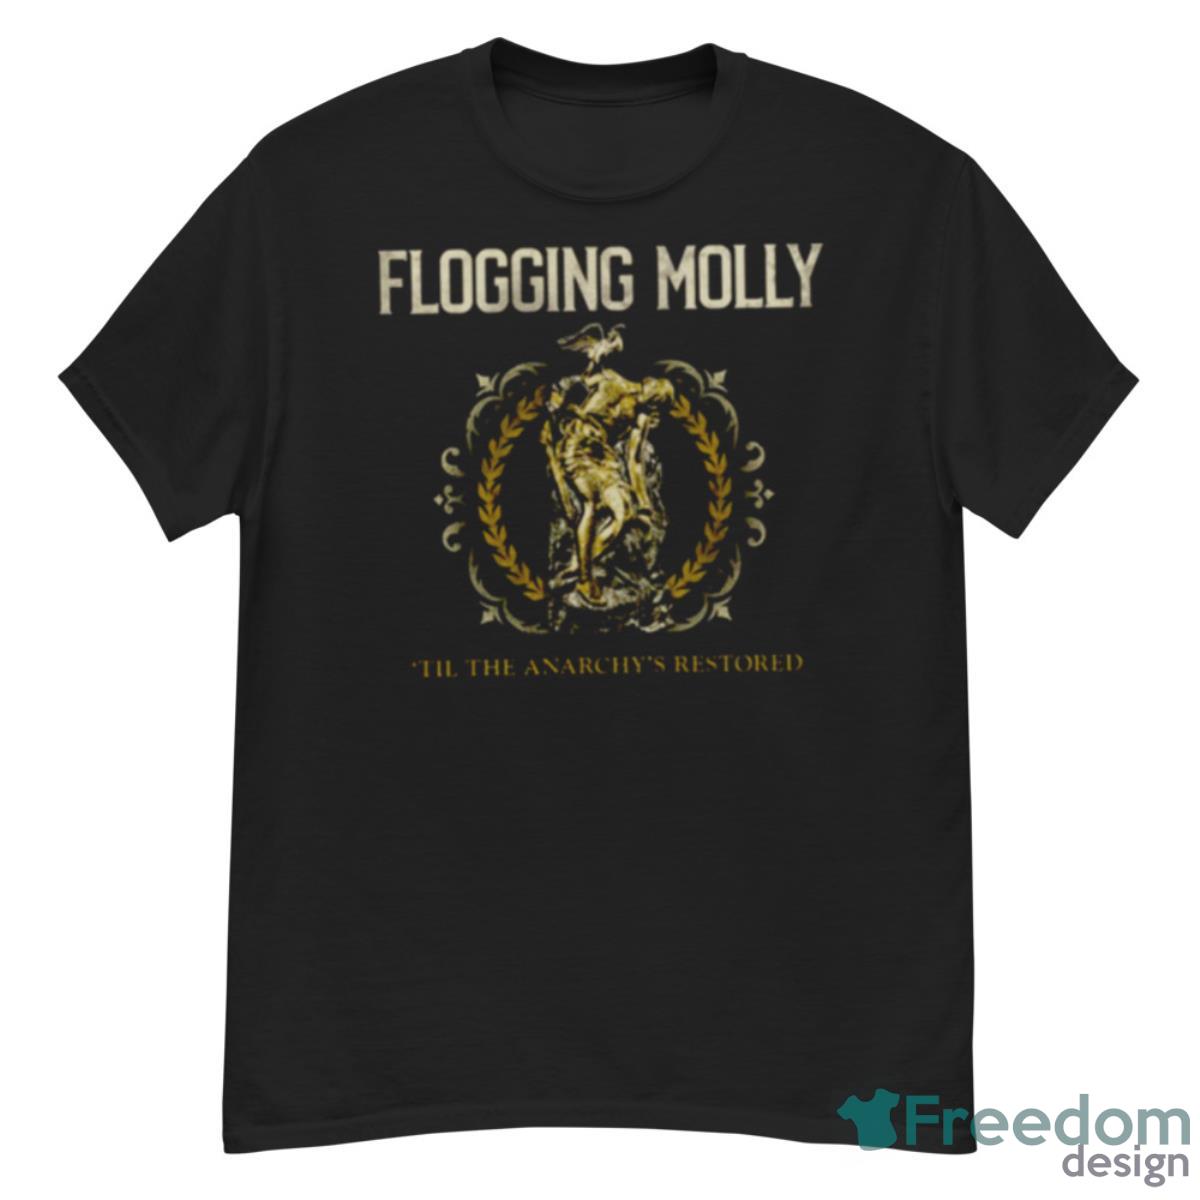 Flogging Molly Release Til The Anarchy’s Restored EP Shirt - G500 Men’s Classic T-Shirt